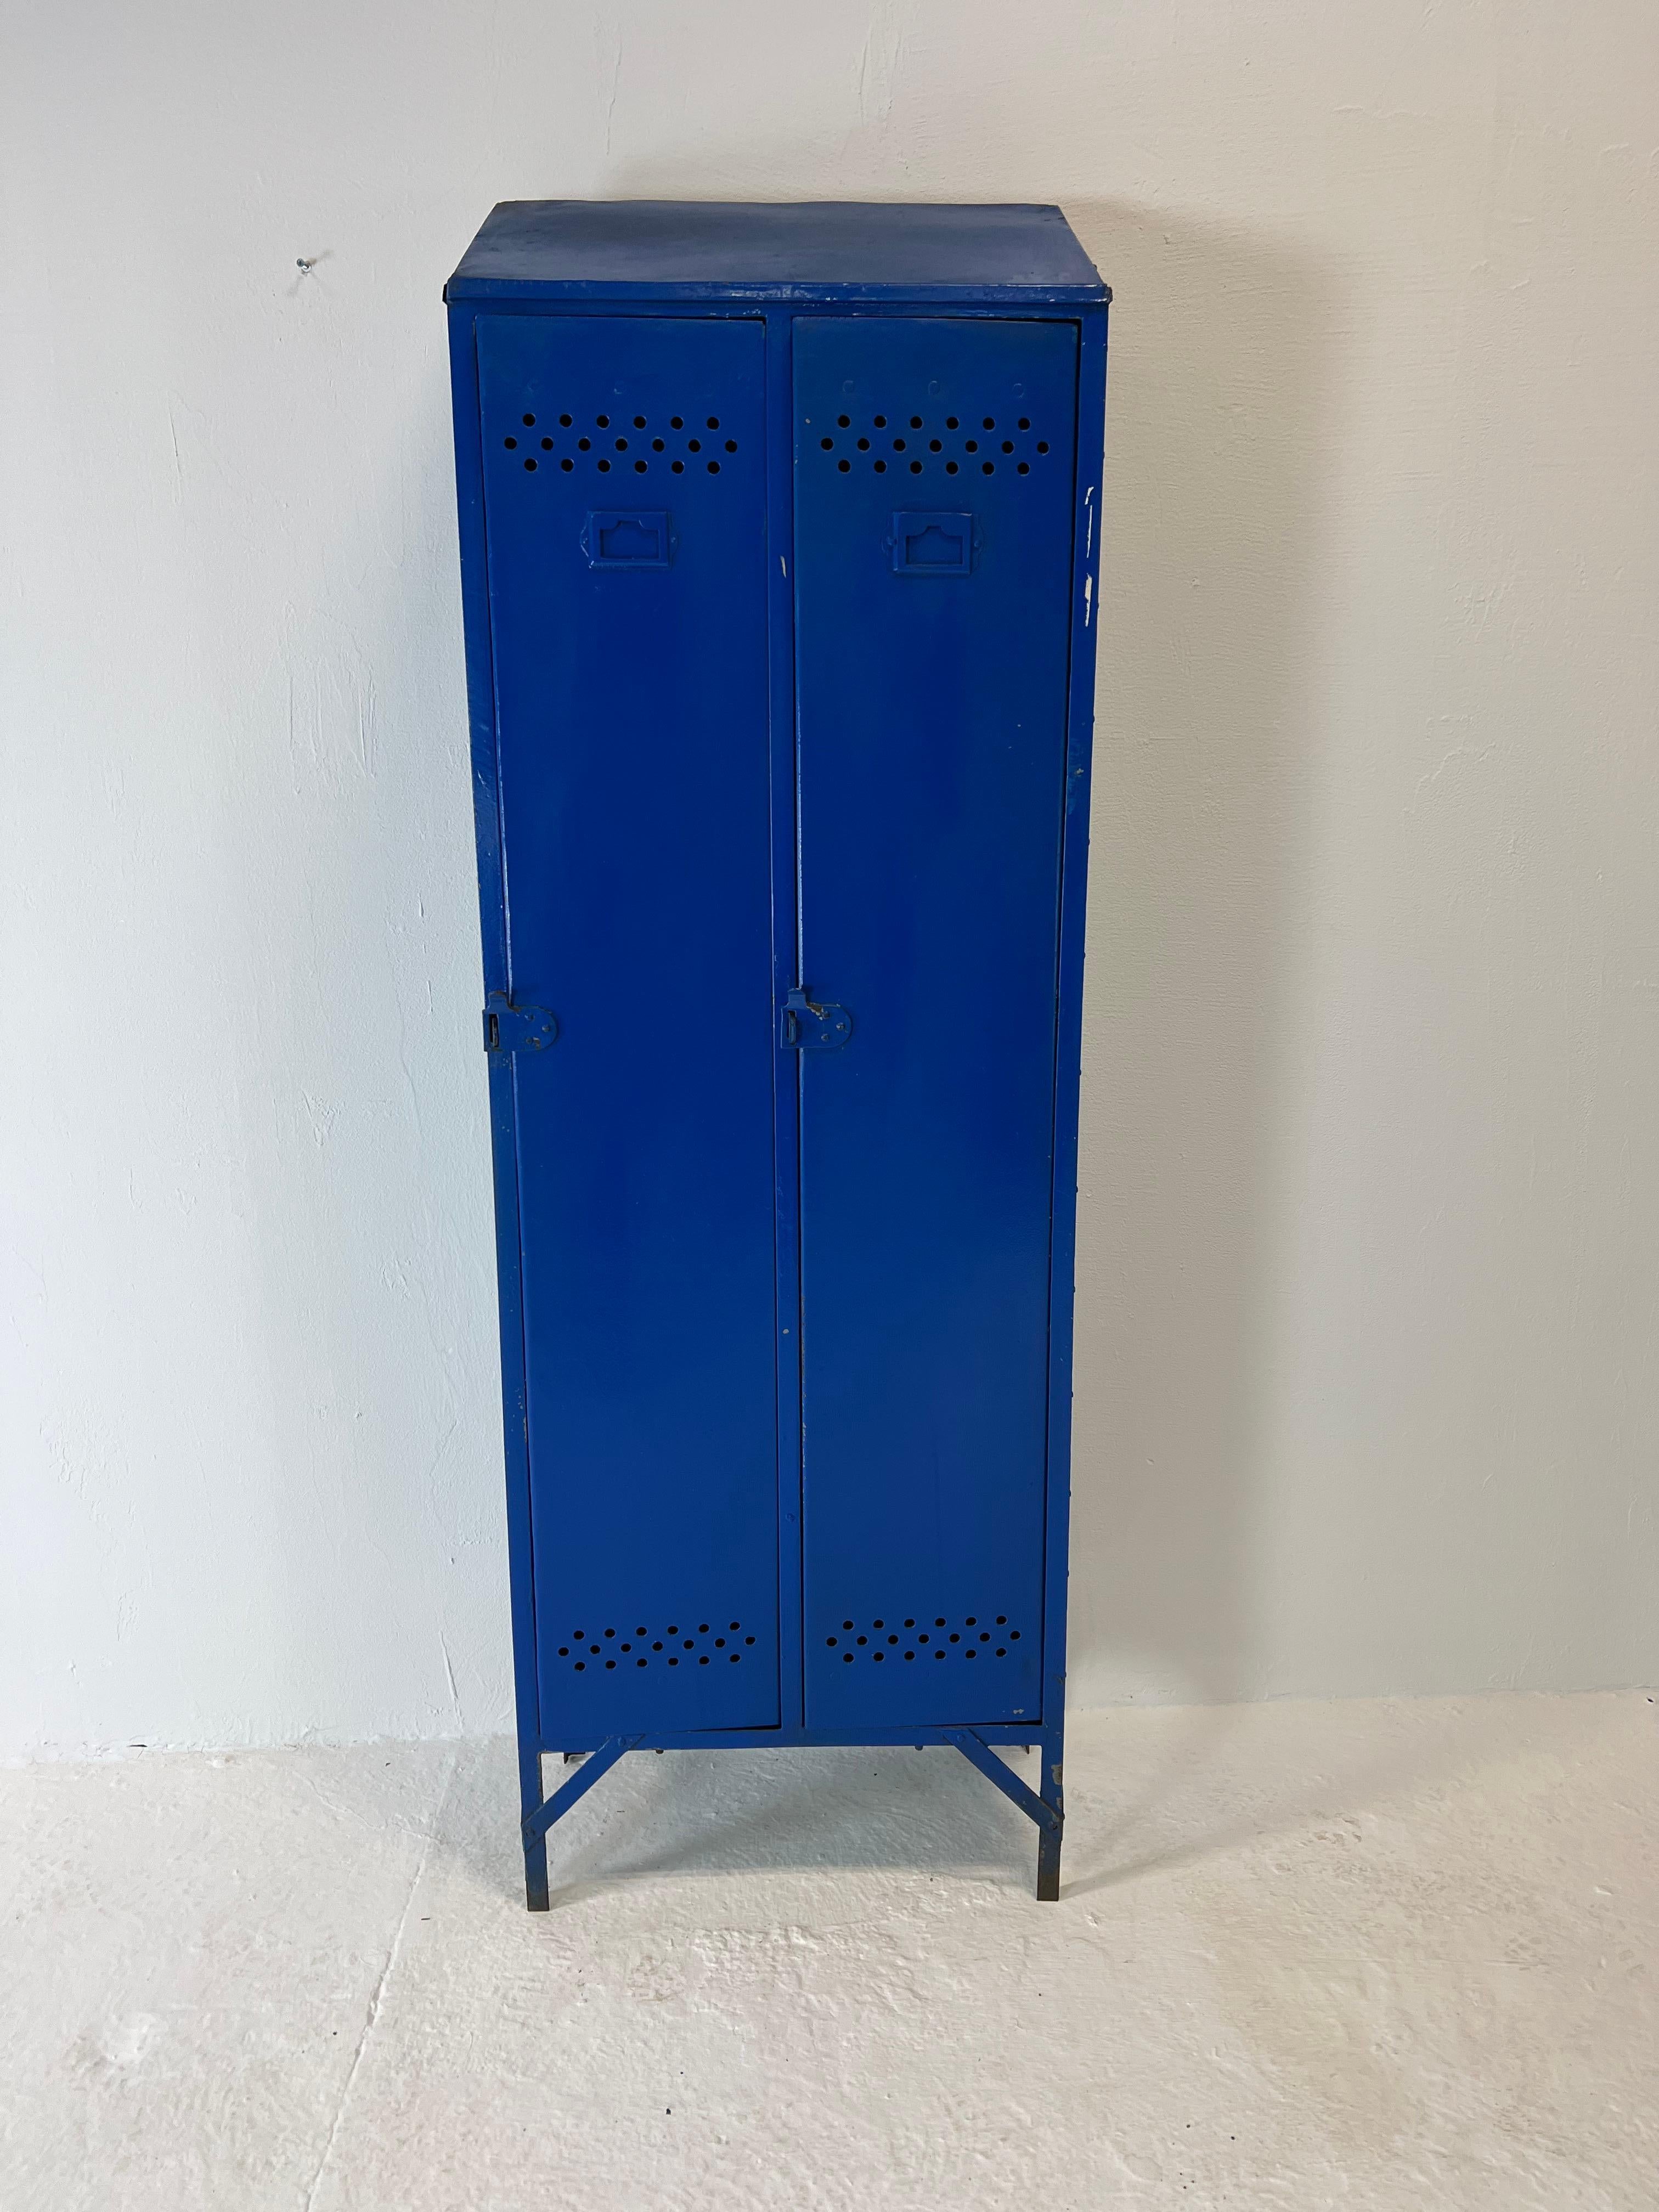 Rare and pretty metal locker with rivets from the 50s. In riveted metal and with sliding doors. The doors close very well, the entire piece of furniture has been kept original. The paint has been brushed, cleaned and the whole sanitized with several